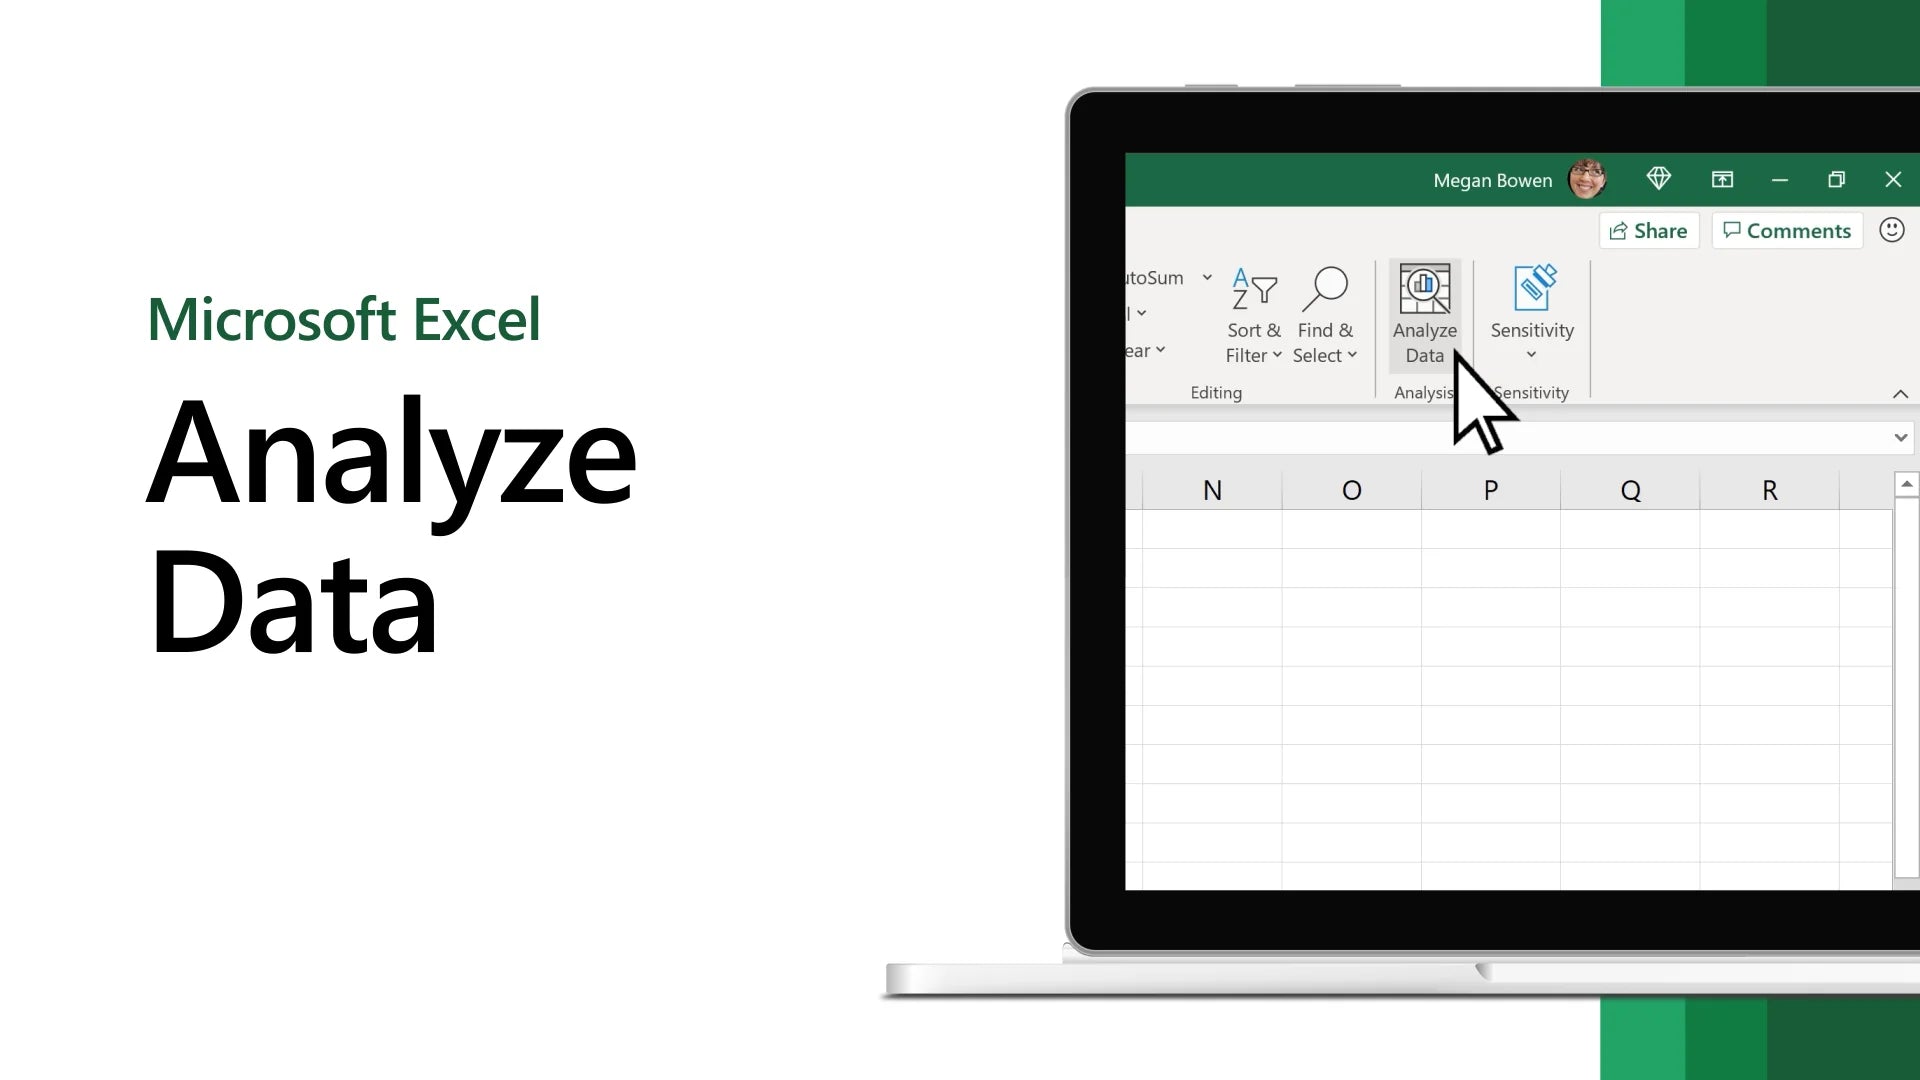 How to analyze data in Excel